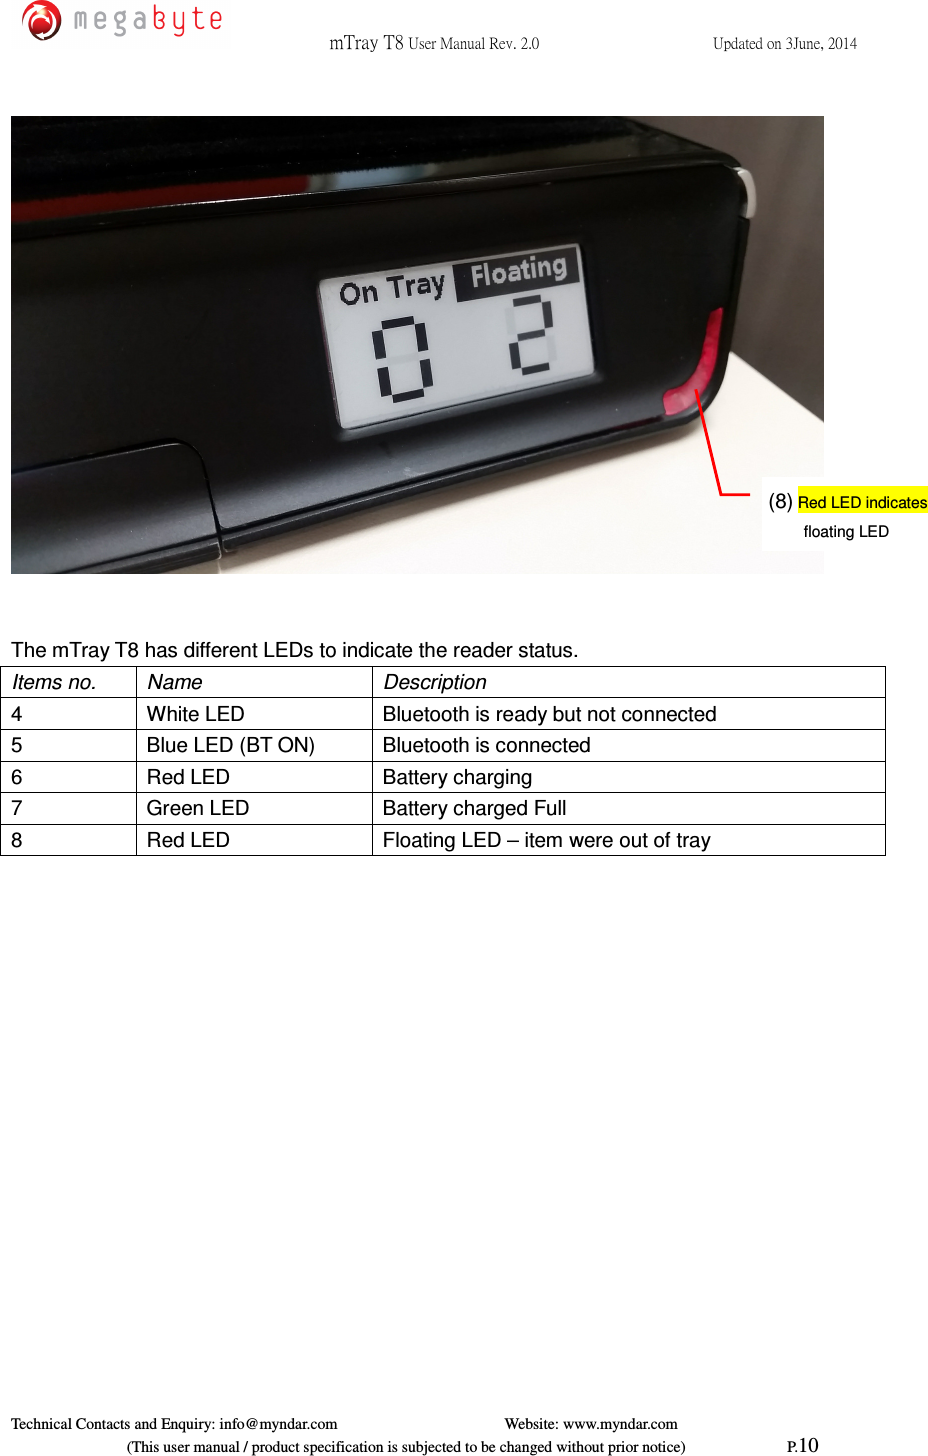  mTray T8 User Manual Rev. 2.0  Updated on 3June, 2014     Technical Contacts and Enquiry: info@myndar.com         Website: www.myndar.com                             (This user manual / product specification is subjected to be changed without prior notice)                          P.10      The mTray T8 has different LEDs to indicate the reader status. Items no.  Name  Description 4  White LED    Bluetooth is ready but not connected 5  Blue LED (BT ON)  Bluetooth is connected 6  Red LED    Battery charging 7  Green LED    Battery charged Full 8  Red LED  Floating LED – item were out of tray  (8) Red LED indicates floating LED   